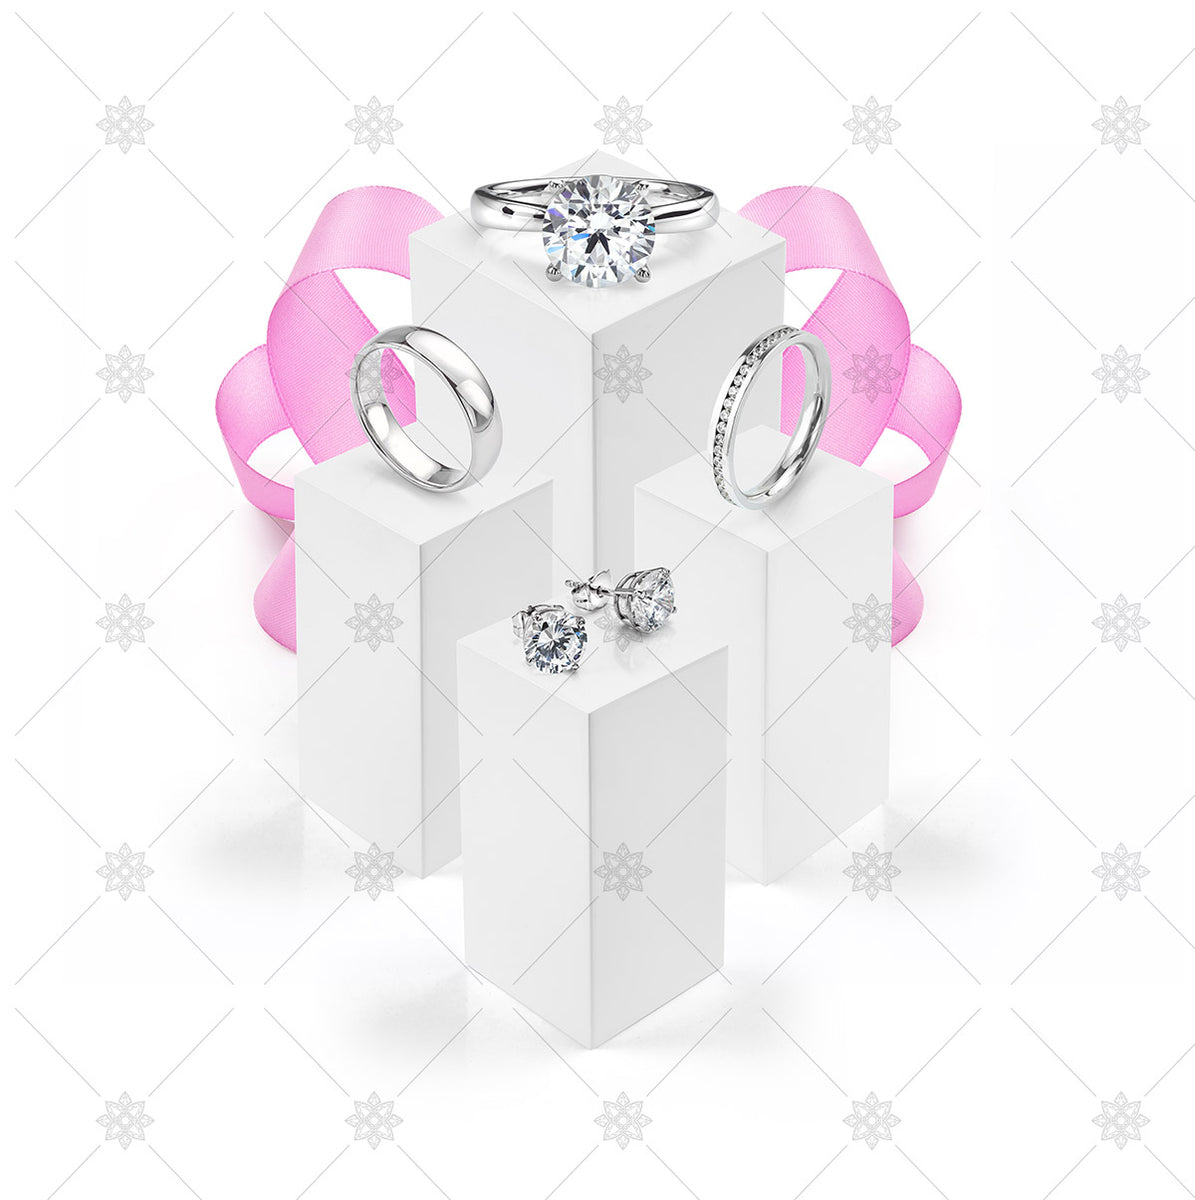 Diamond Jewellery and Wedding Band Collection presented with pink ribbon - JG4084